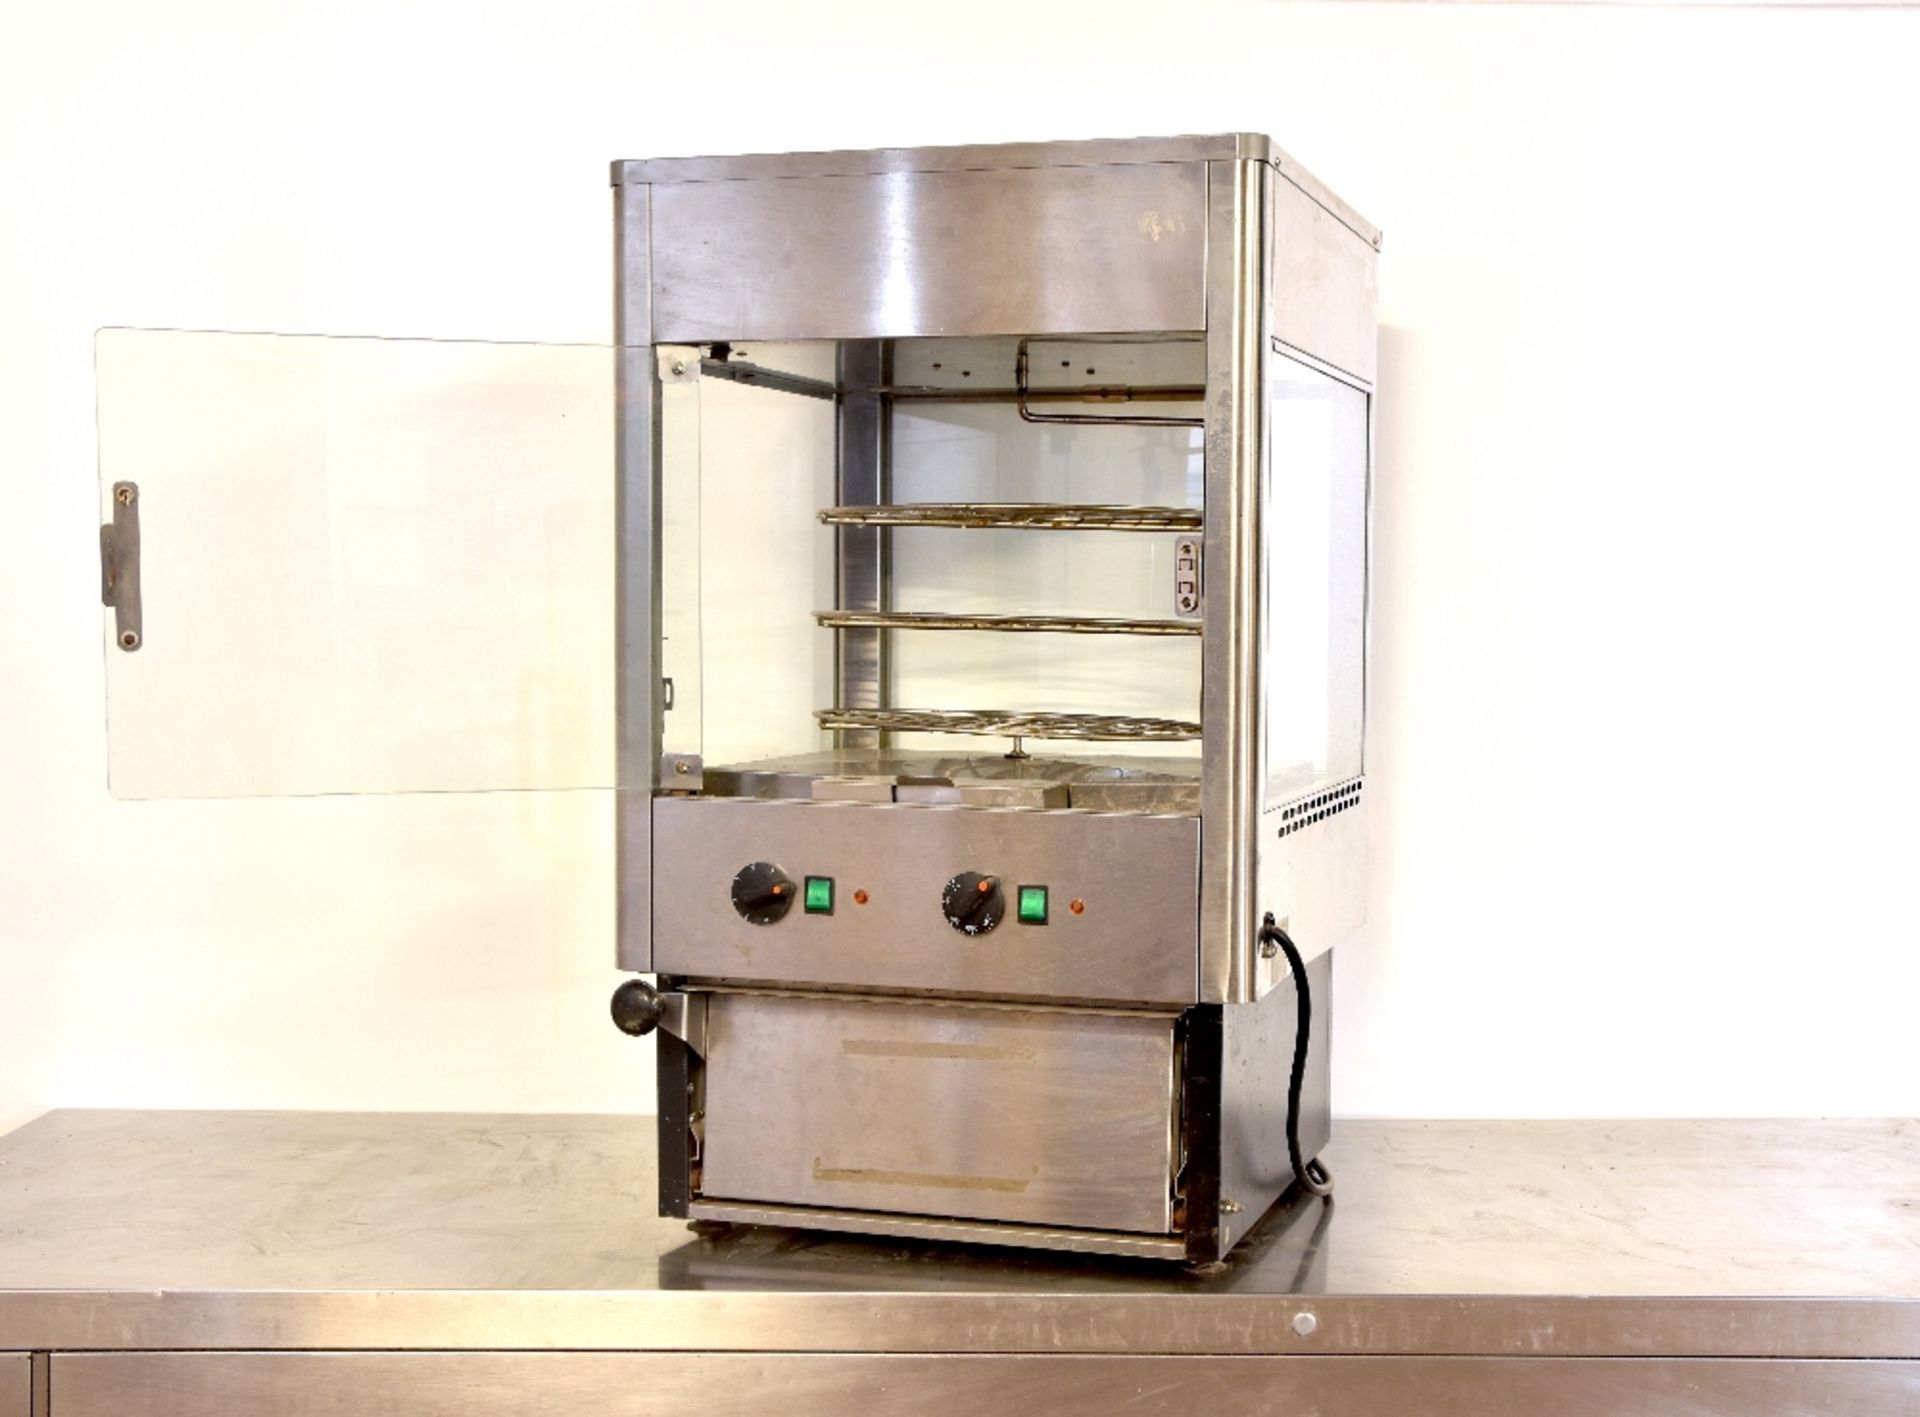 Lincat Pizza Oven + Hot Rotating Display Cabinet 3 Shelves -1ph - Tested Working - Image 2 of 2